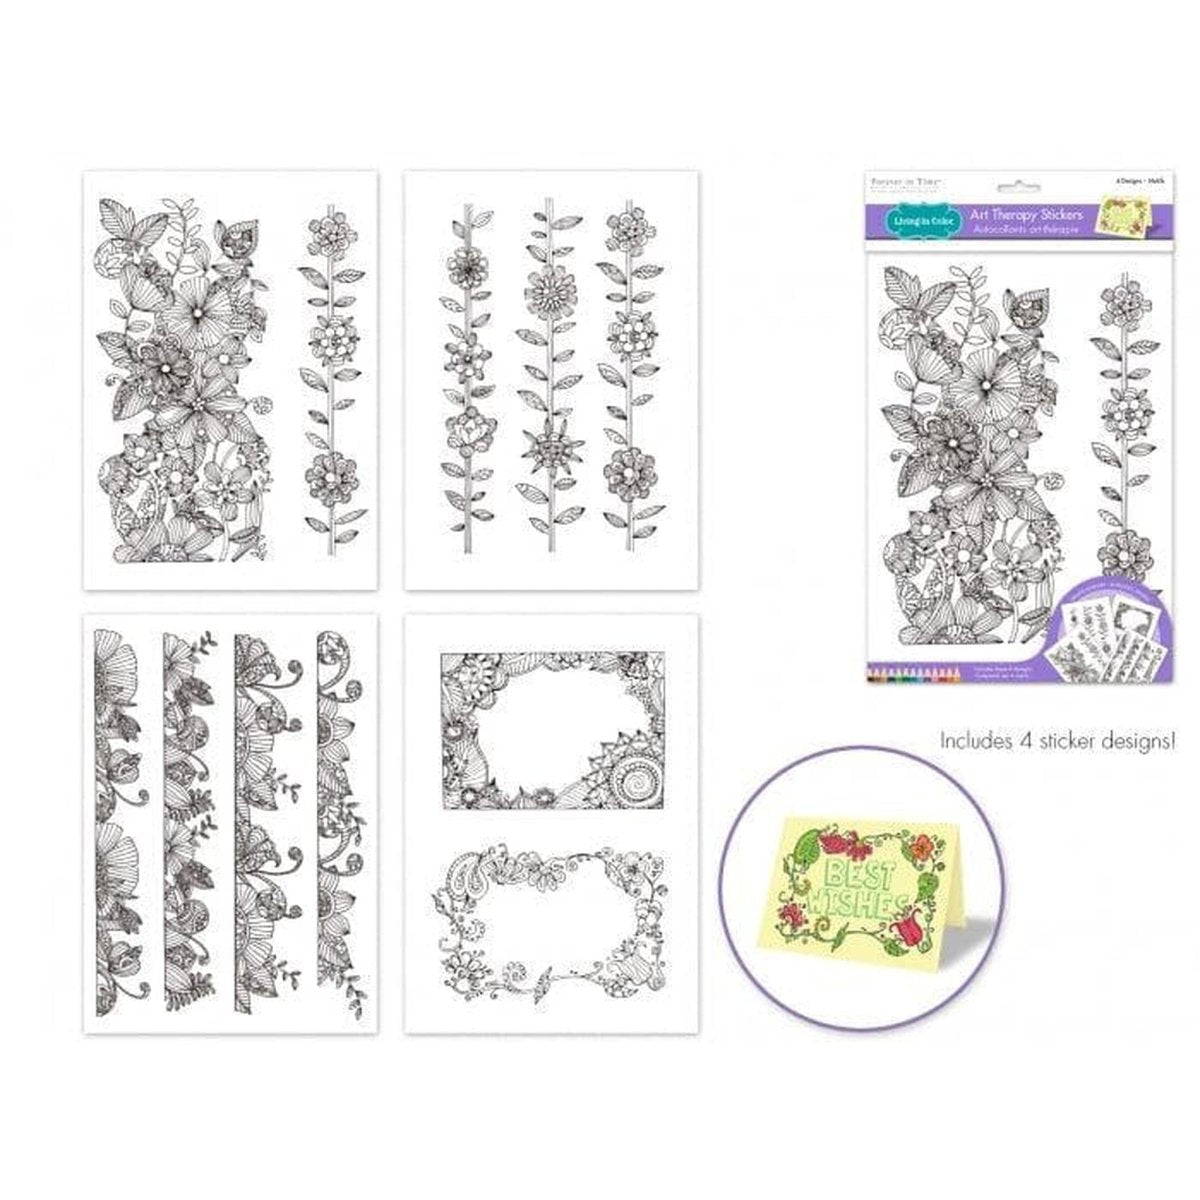 ART THERAPY STICKERS ORNATE BORDERS - Kids Party Craft